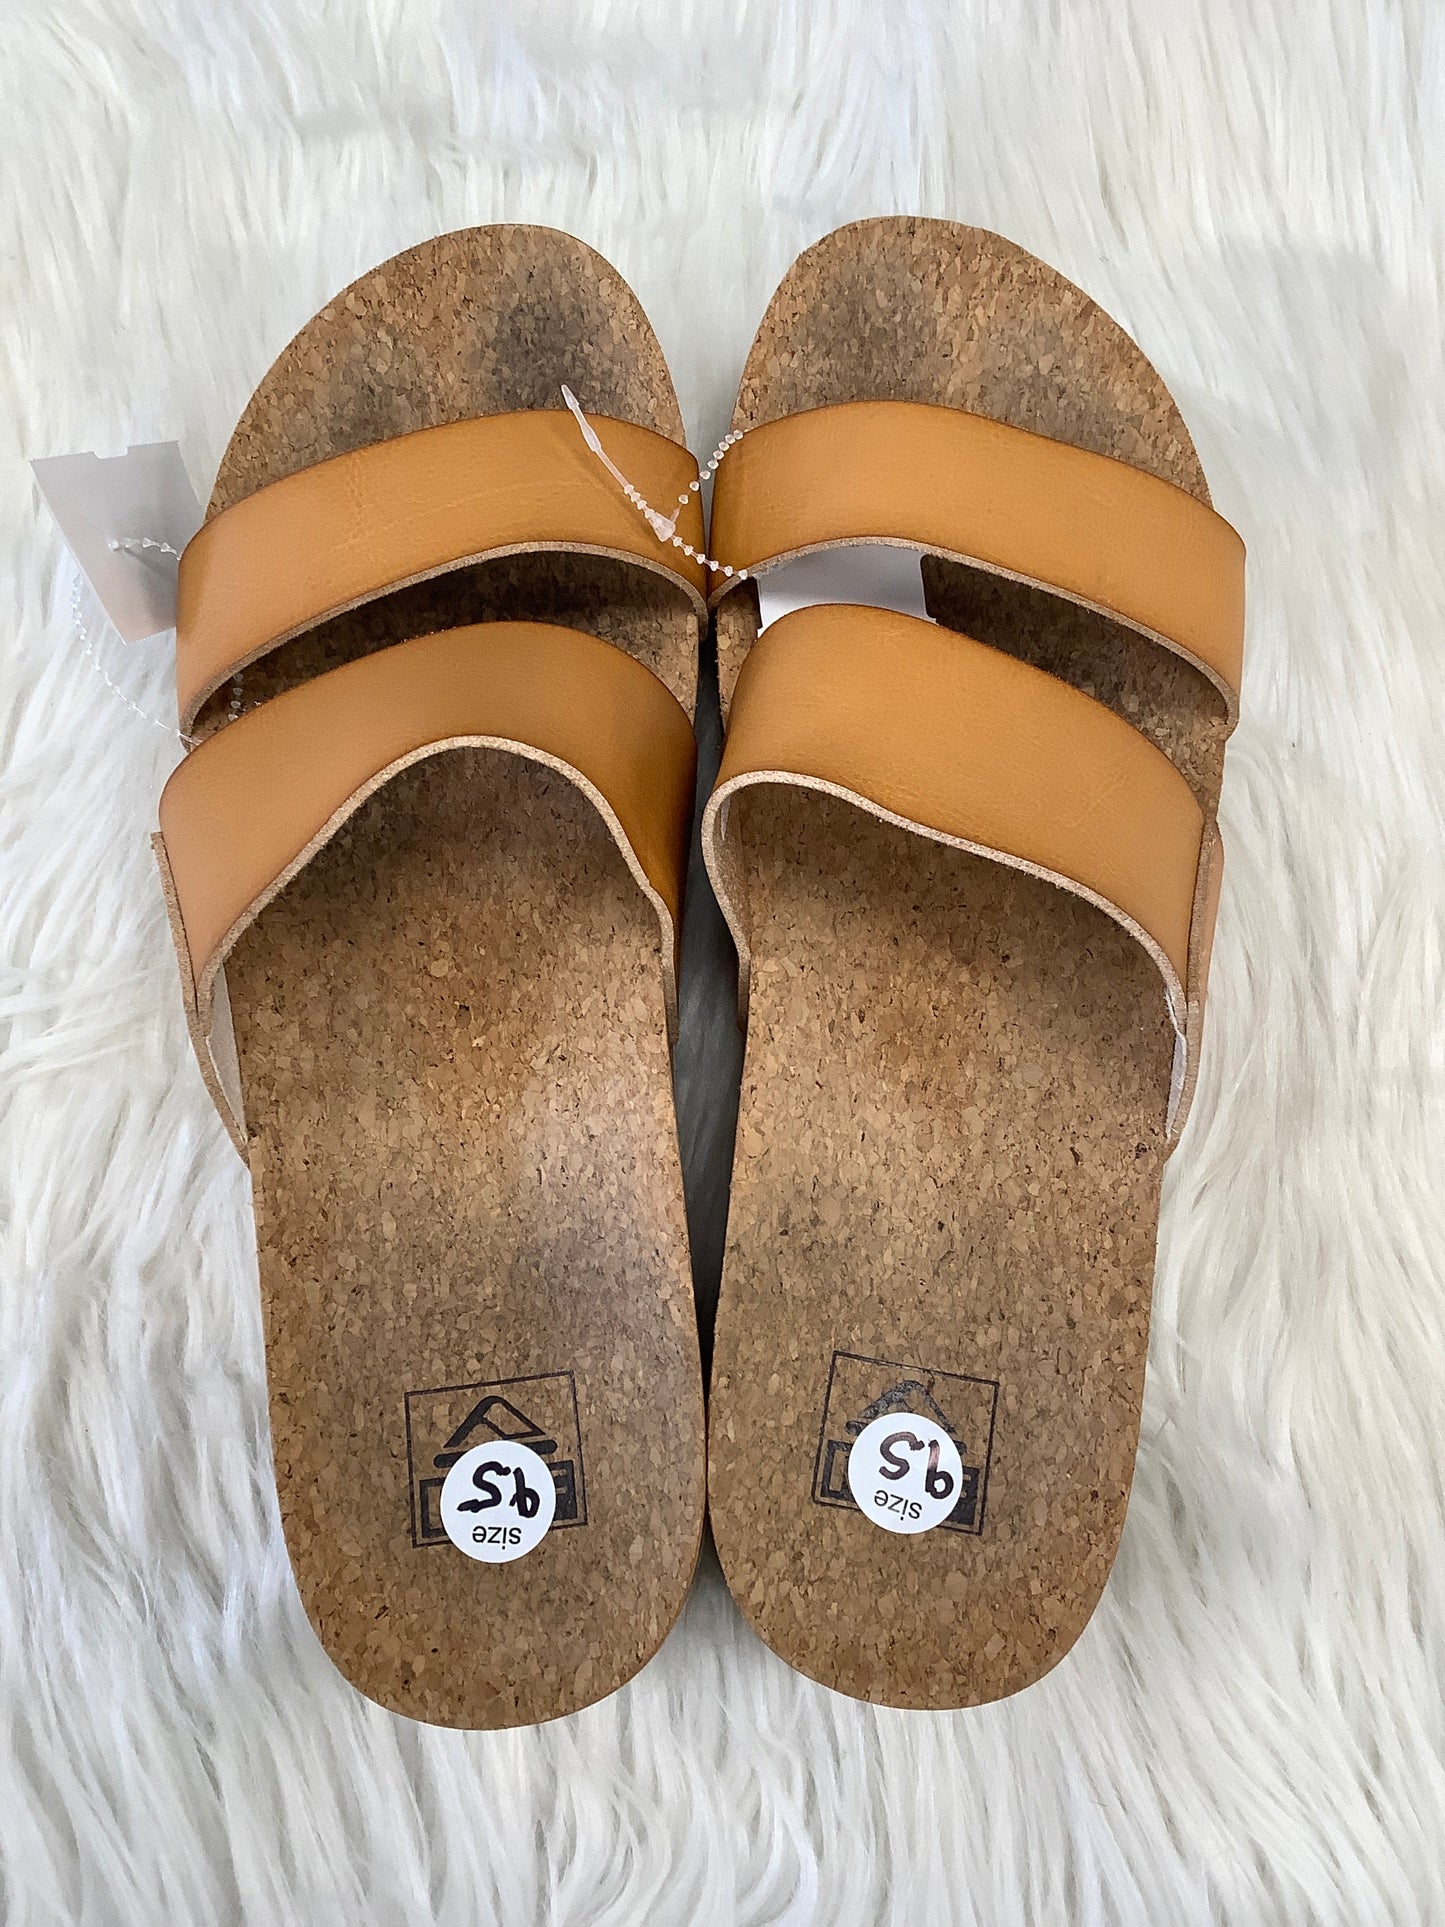 Brown Sandals Flats Reef, Size 9.5